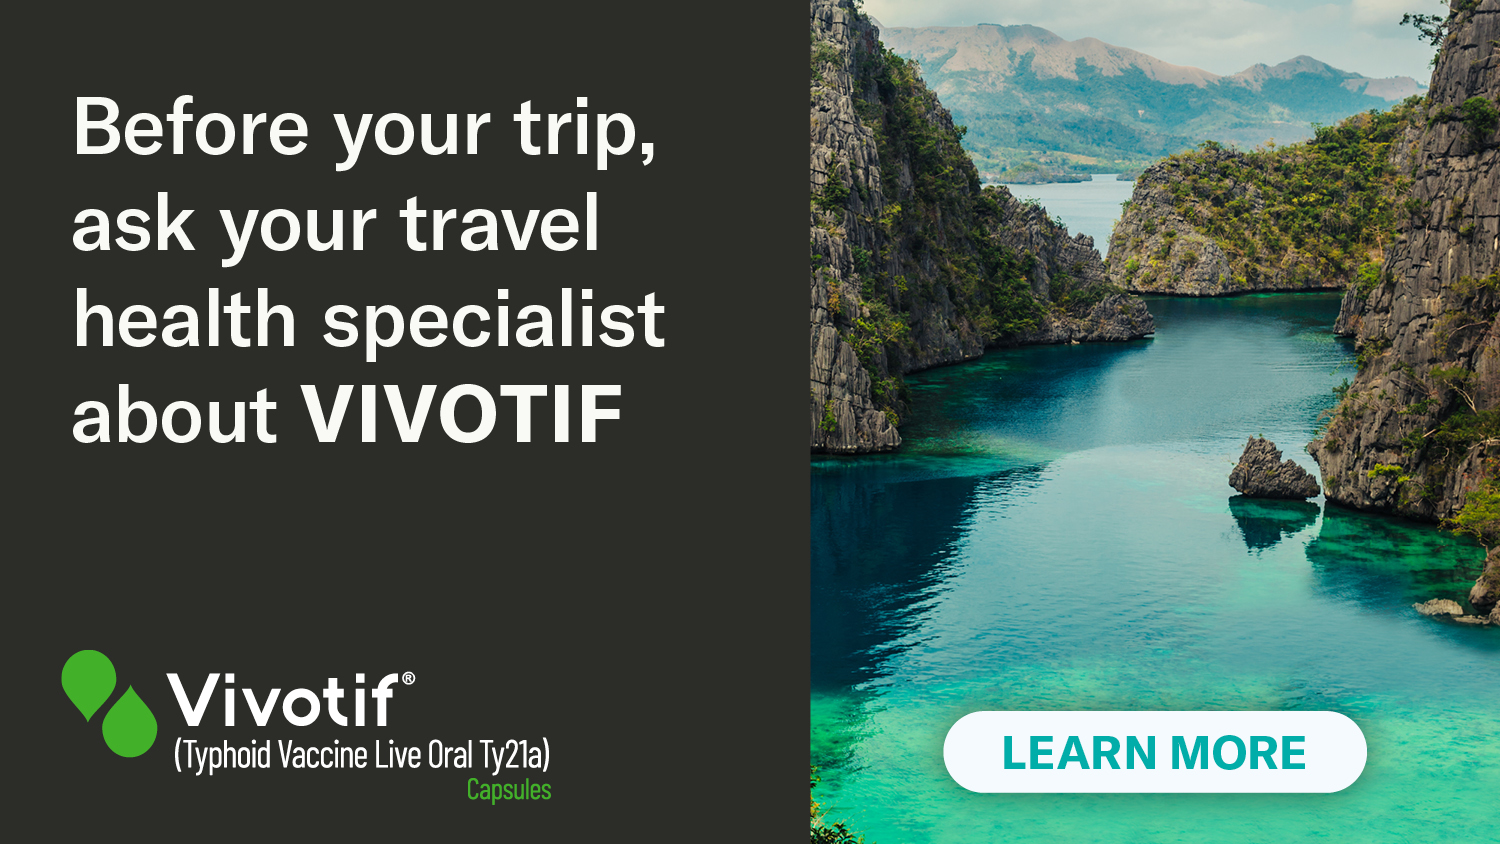 Ask your travel health specialist about VIVOTIF - Click to learn more